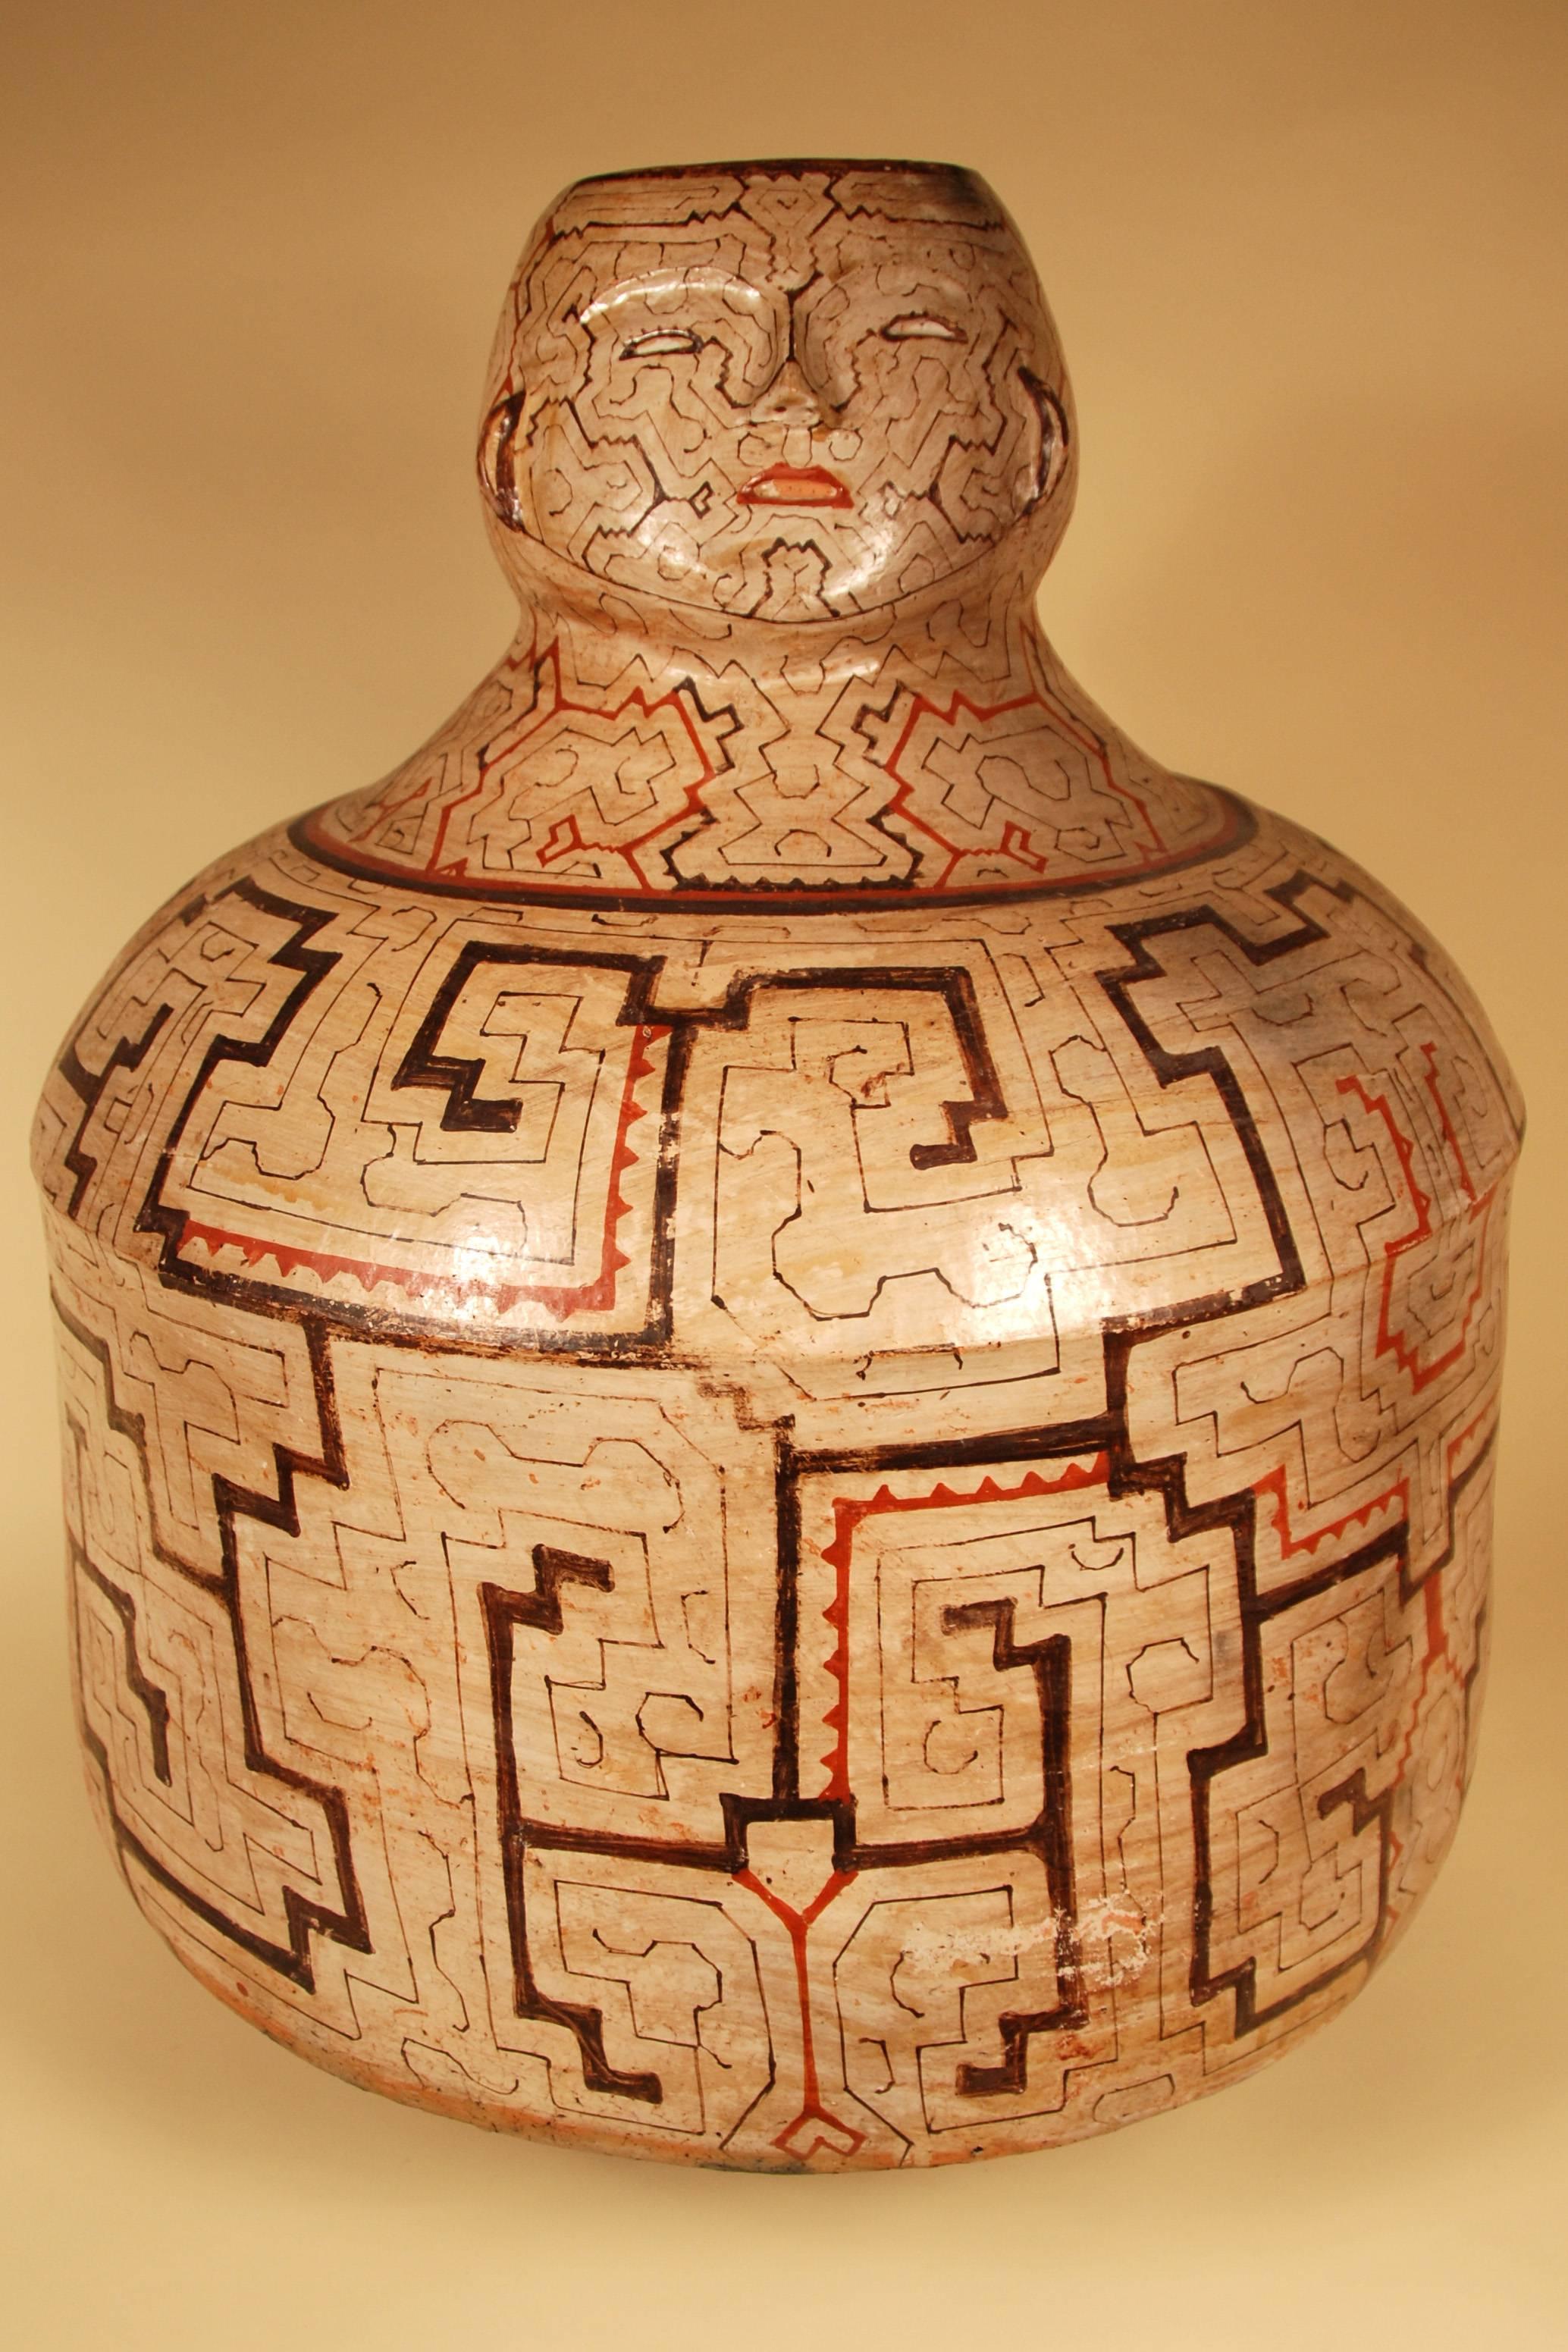 Mid-20th Century Shipibo South American Double Faced Figurative Ceramic Pot

A traditionally decorated vessel created by the Shipibo people in the Peruvian Amazon. Natural pigments and a bold, unique, geometric design result in a striking, handsome